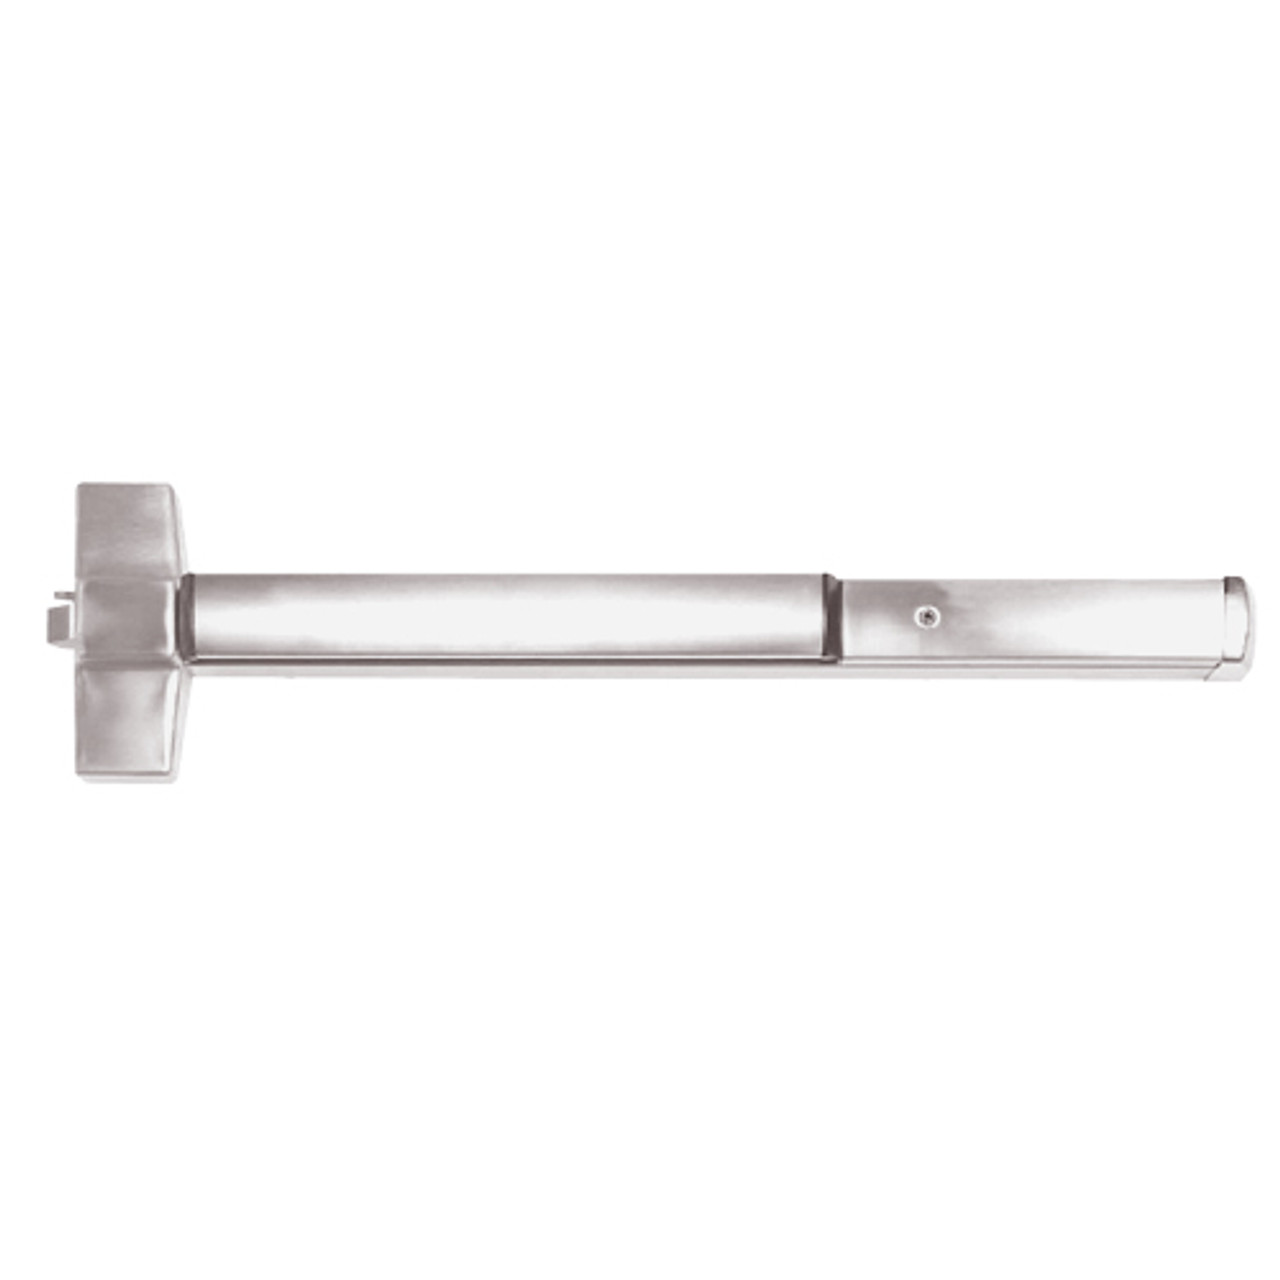 ED5200-630-MELR Corbin ED5200 Series Non Fire Rated Exit Device with Motor Latch Retraction in Satin Stainless Steel Finish